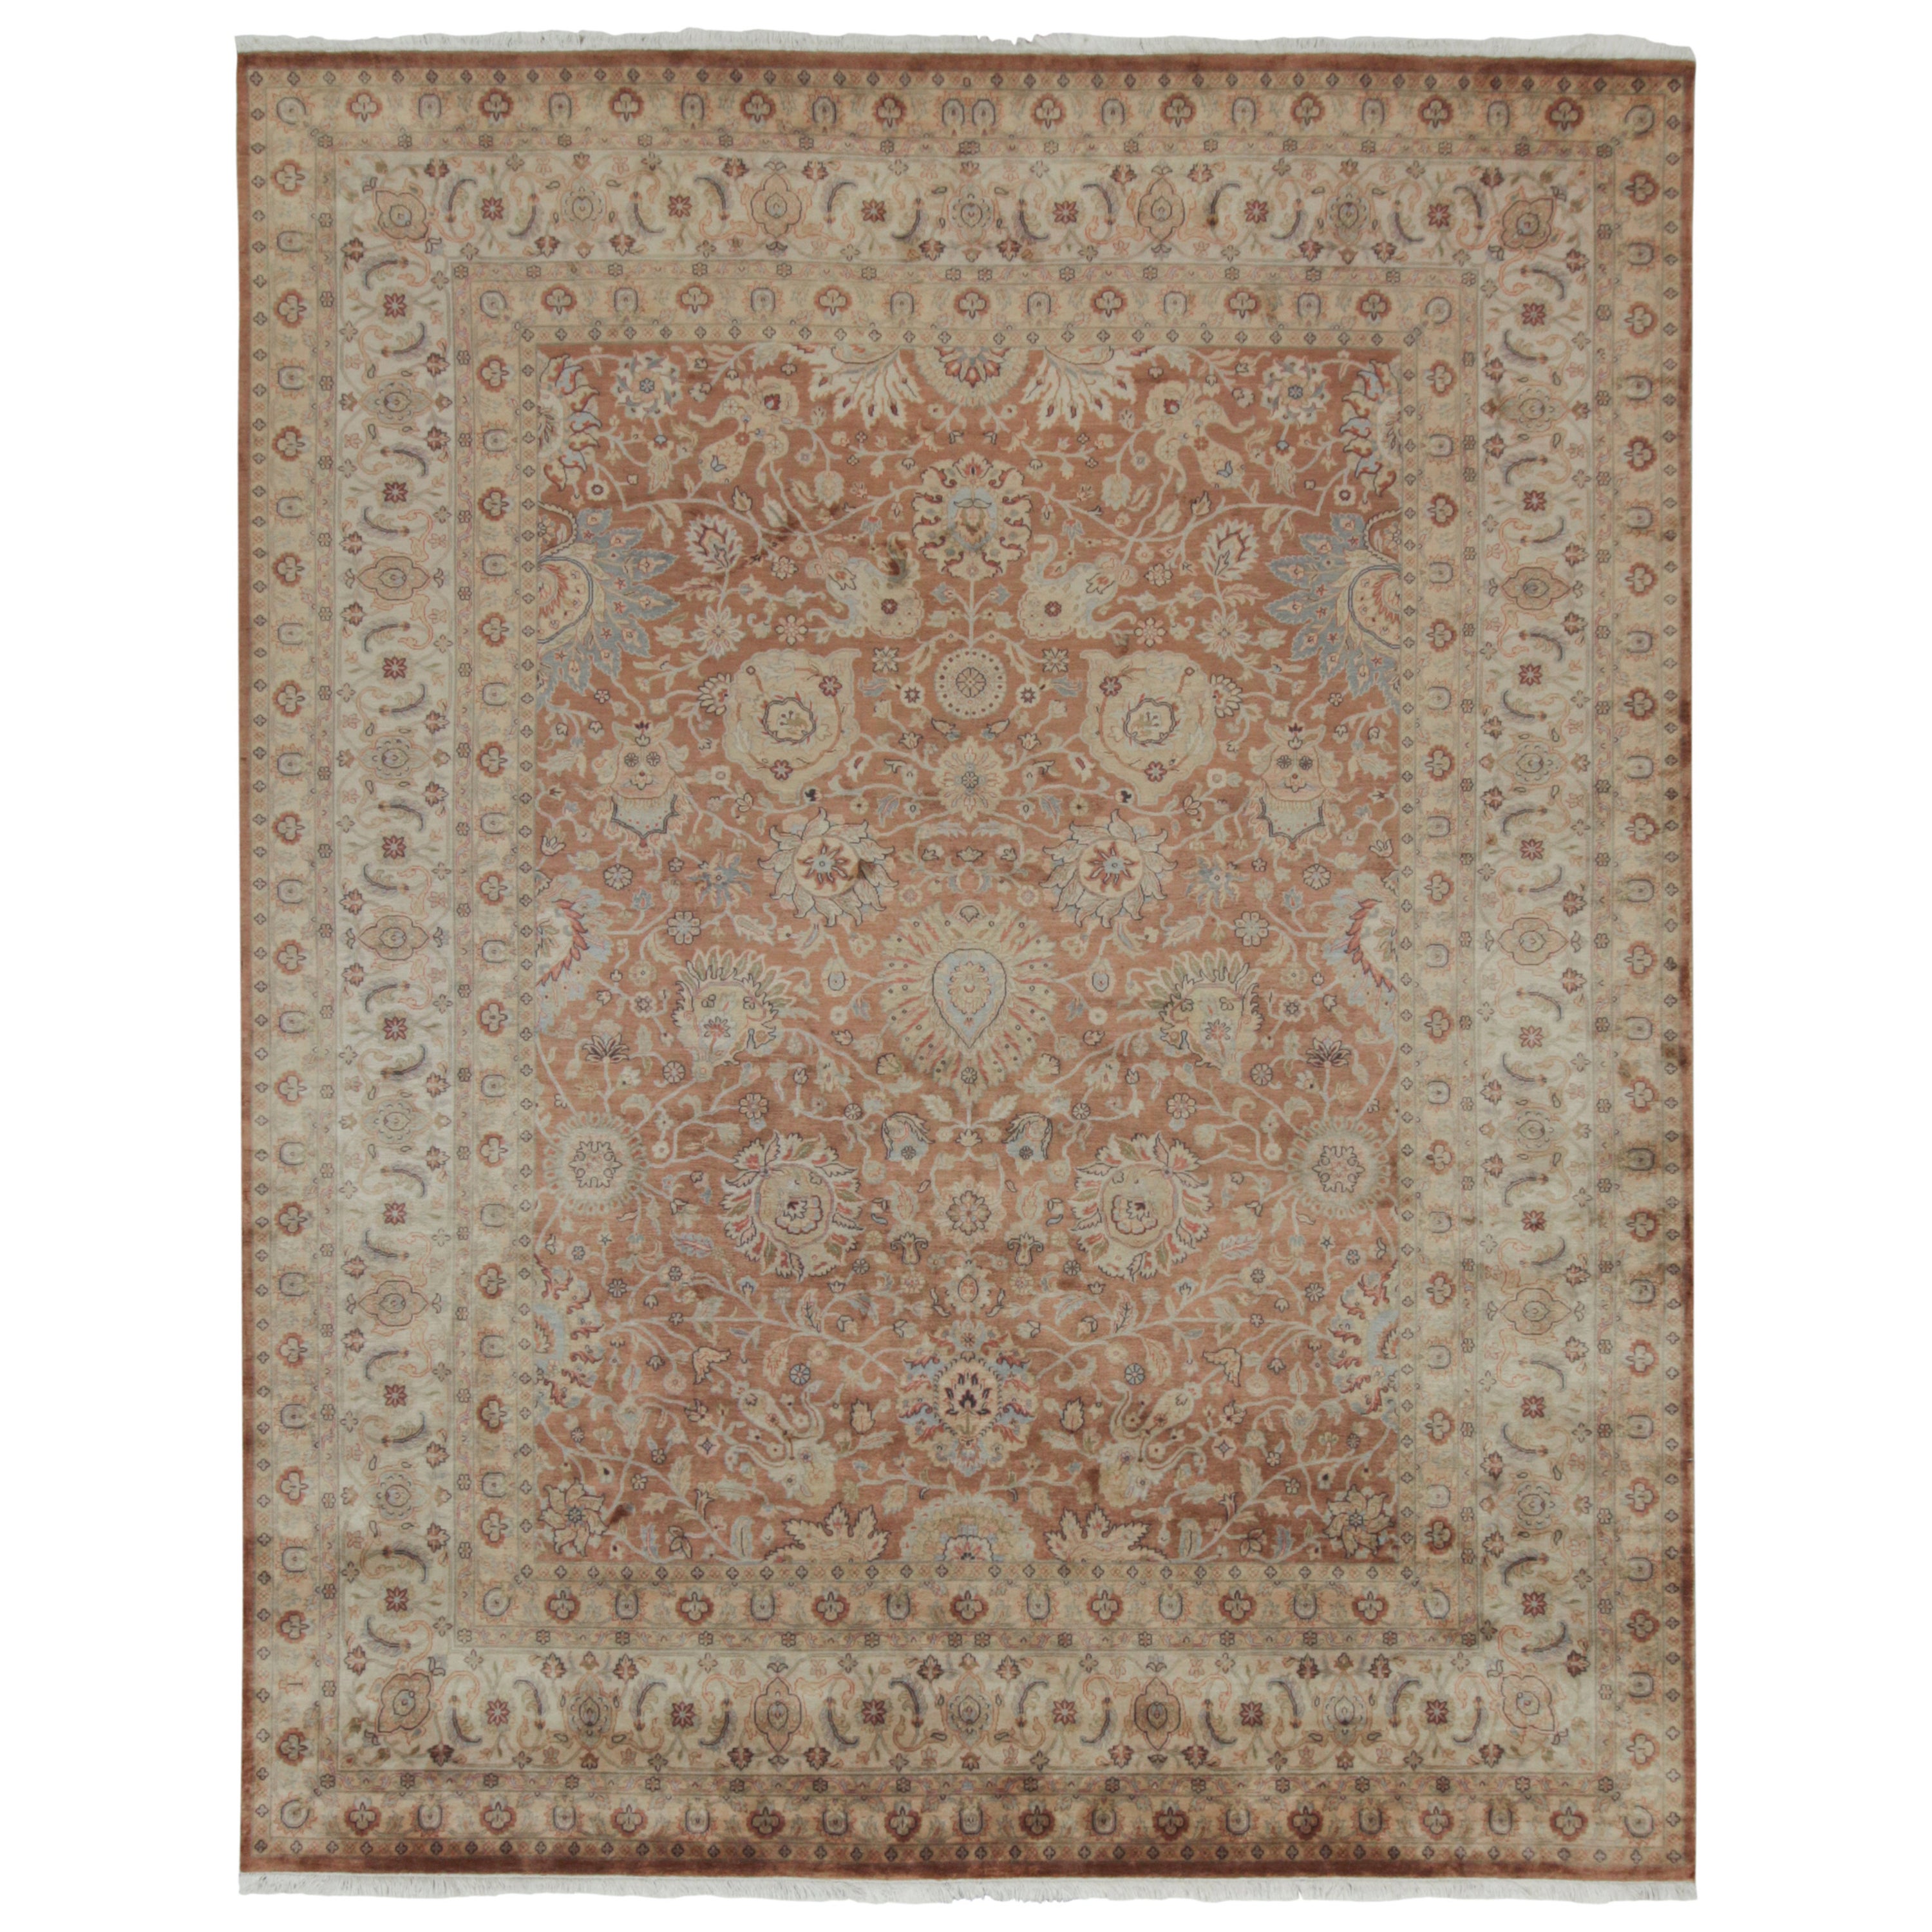 Rug & Kilim’s Persian Tabriz Style Rug in Rust, Brown and Blue Floral Pattern For Sale